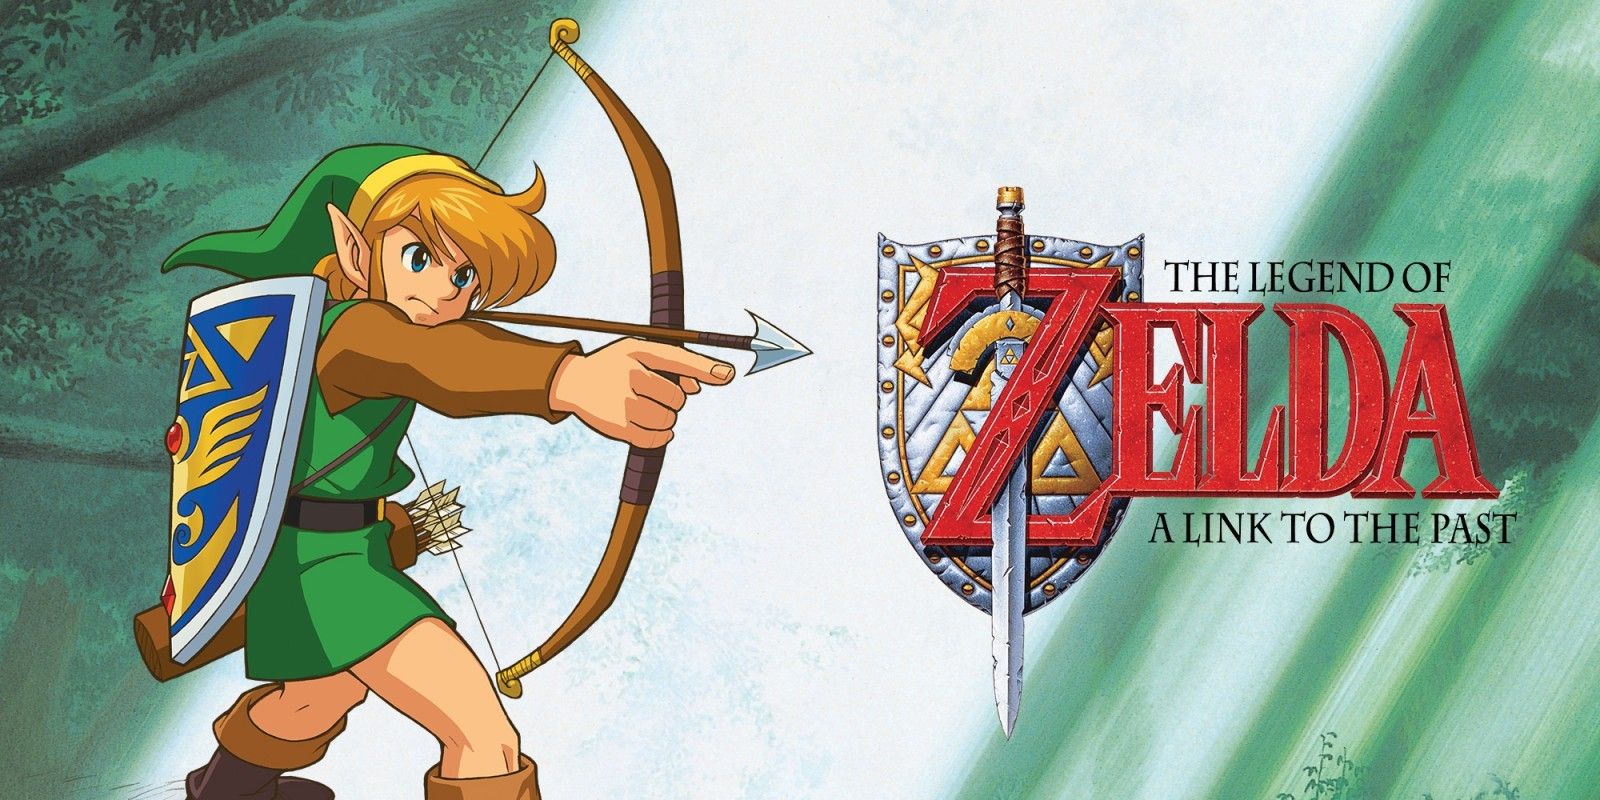 zelda a link to the past promotional art of link shooting a bow nintendo switch online